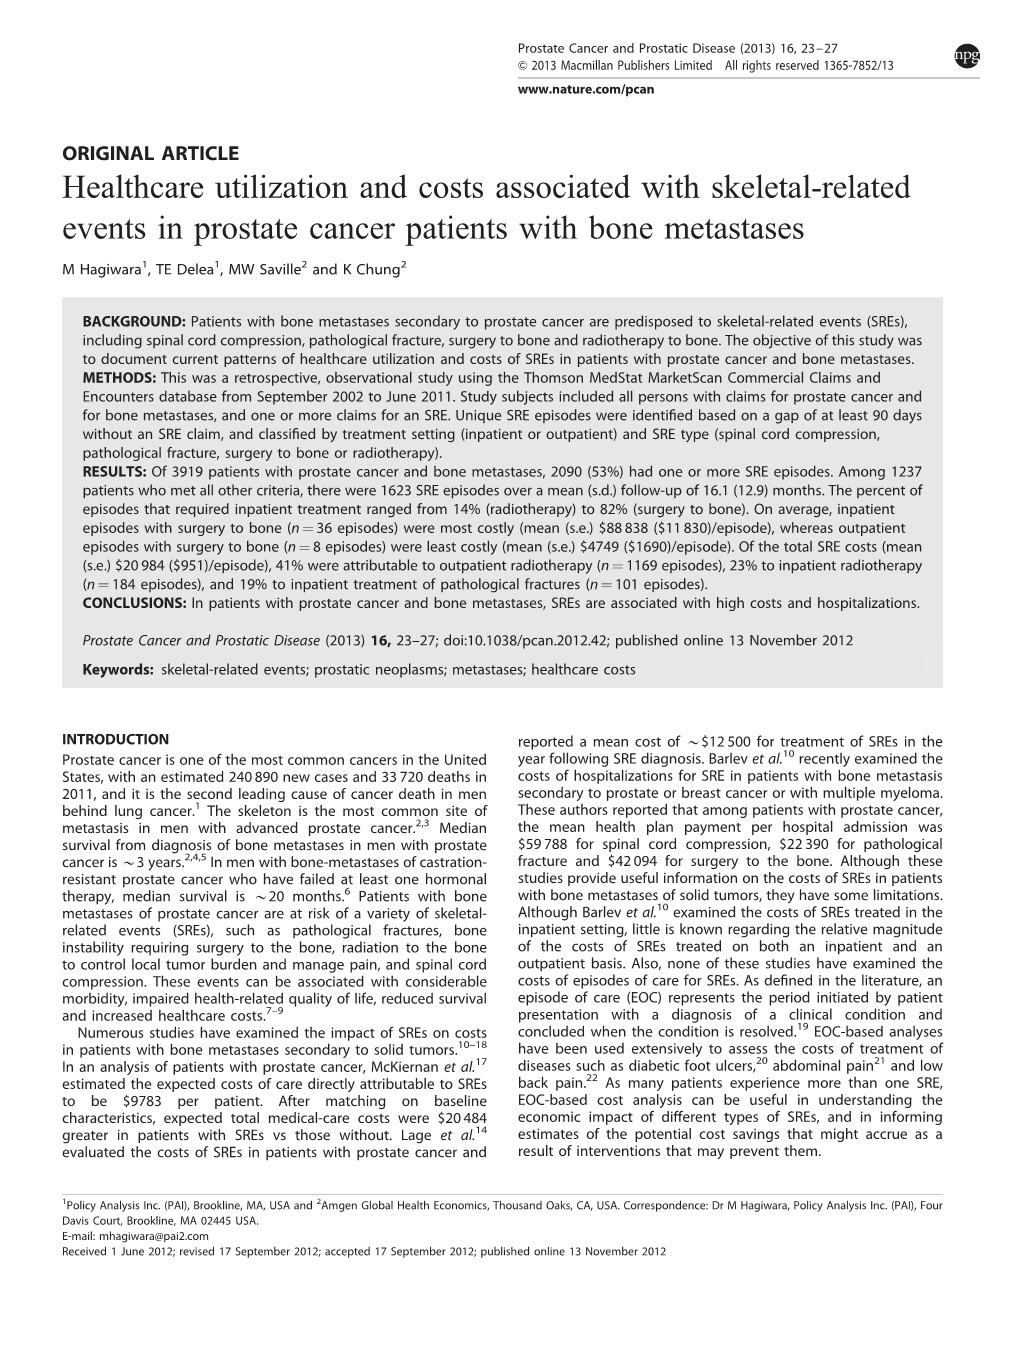 Healthcare Utilization and Costs Associated with Skeletal-Related Events in Prostate Cancer Patients with Bone Metastases